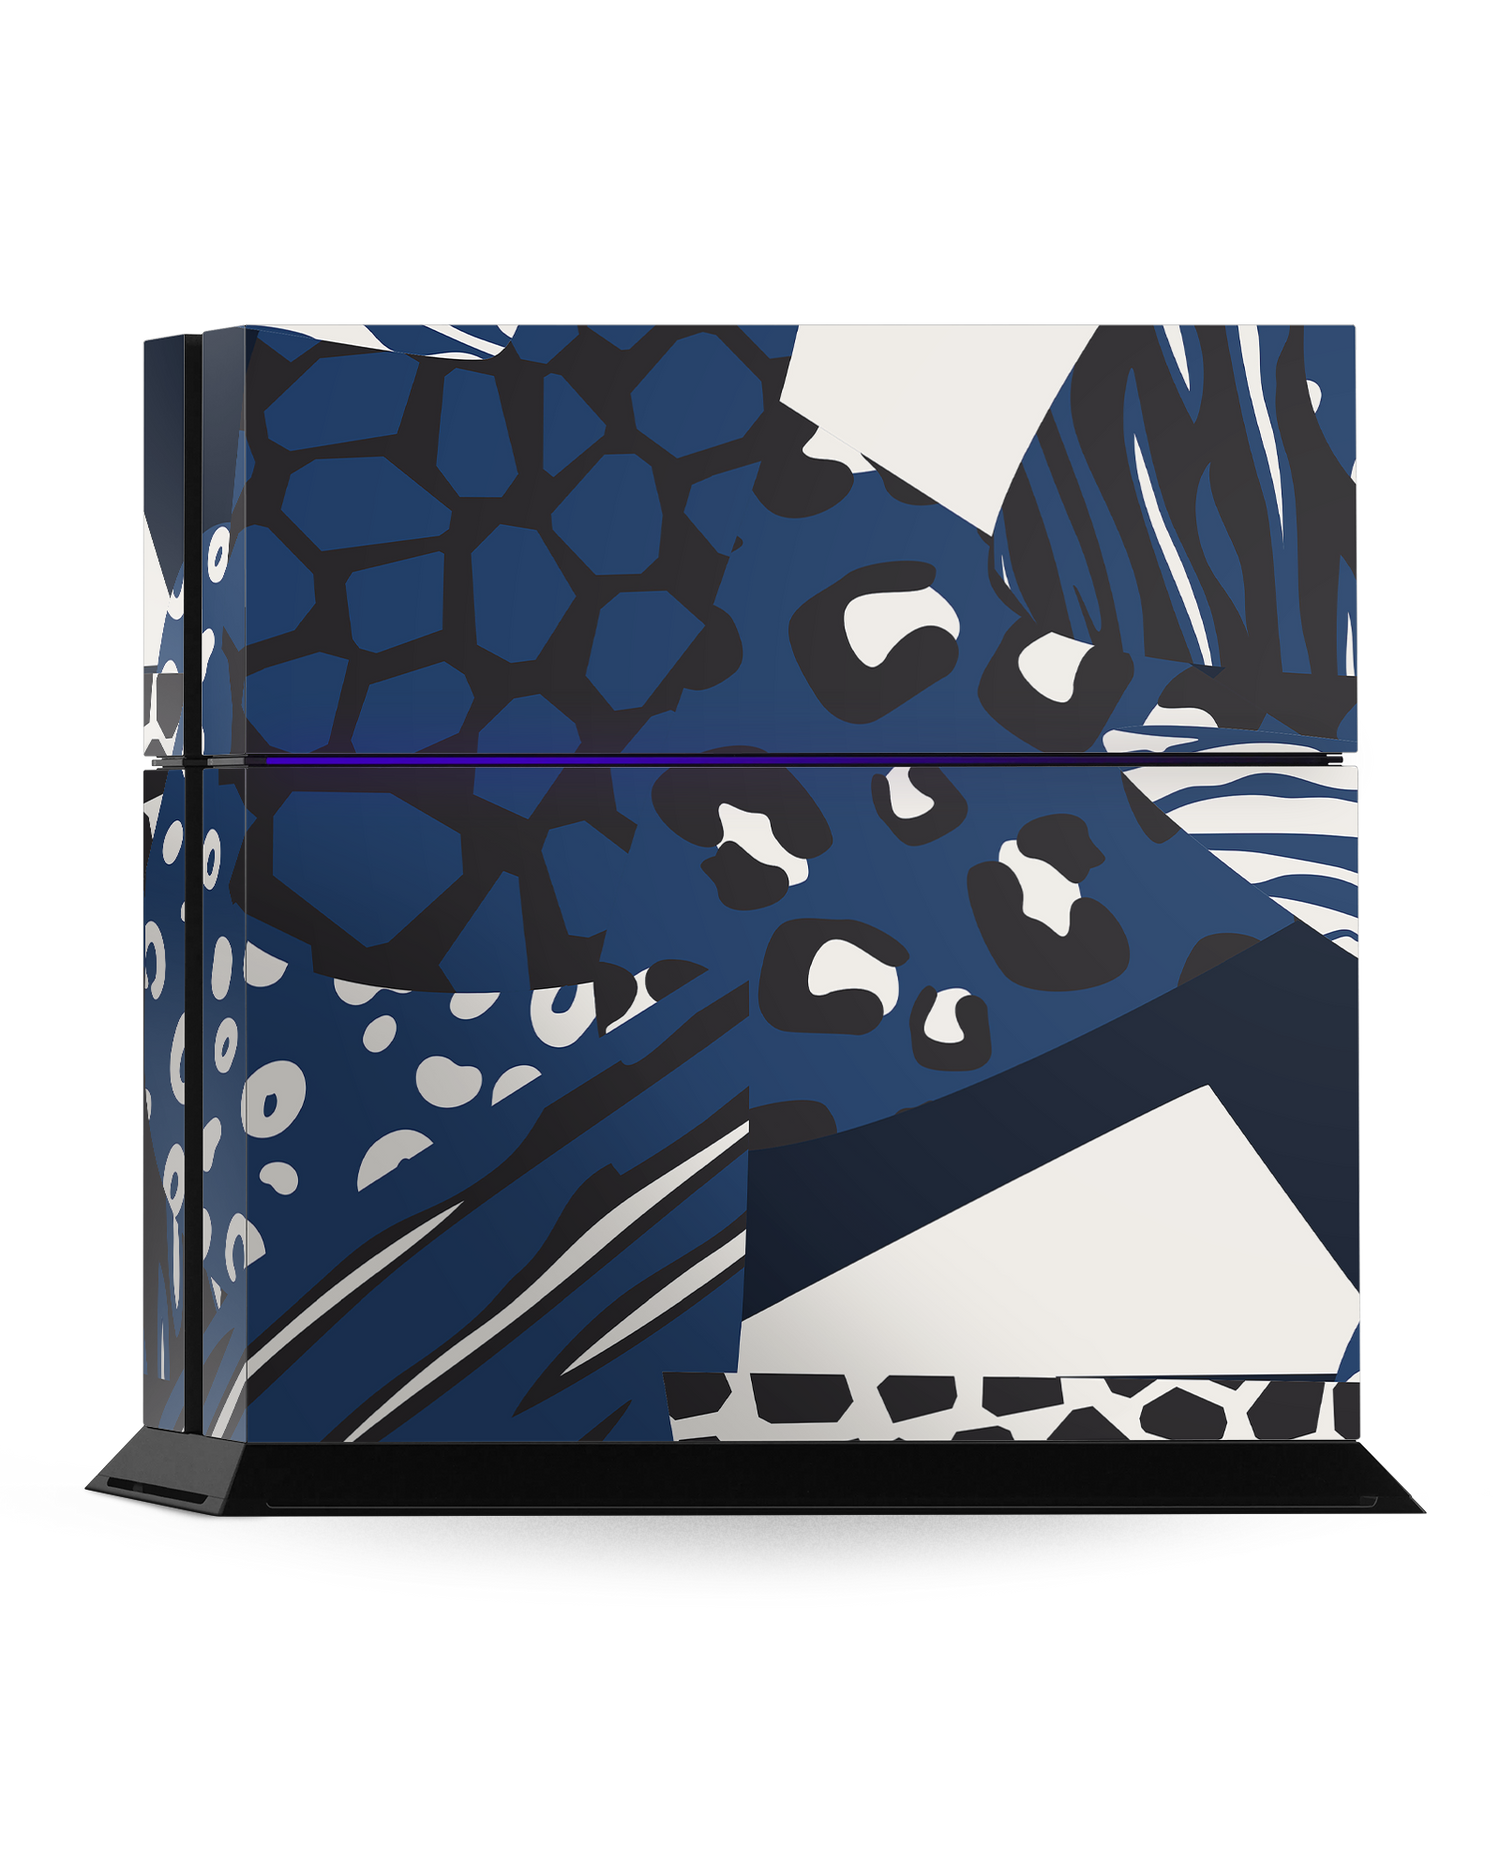 Animal Print Patchwork Console Skin for Sony PlayStation 4: Standing